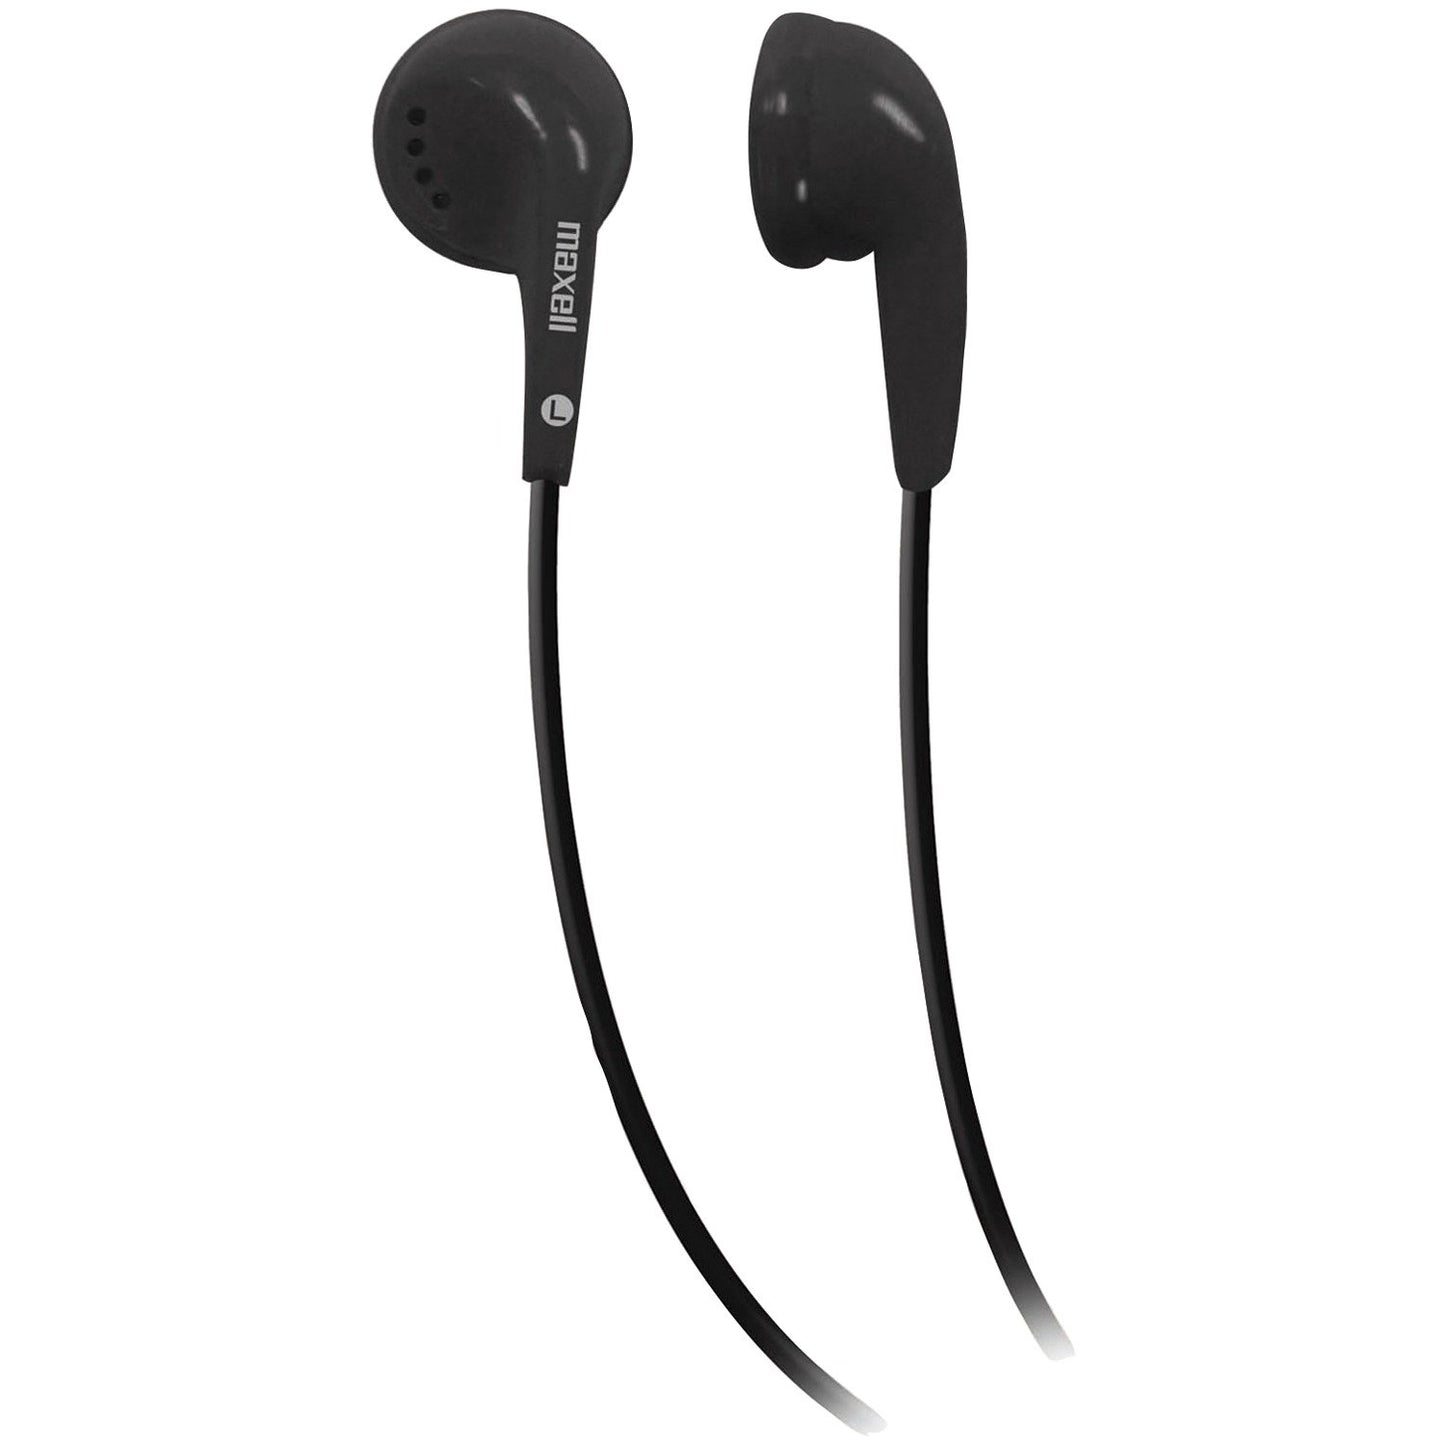 MAXELL 190560 - EB95 Dynamic Earbuds